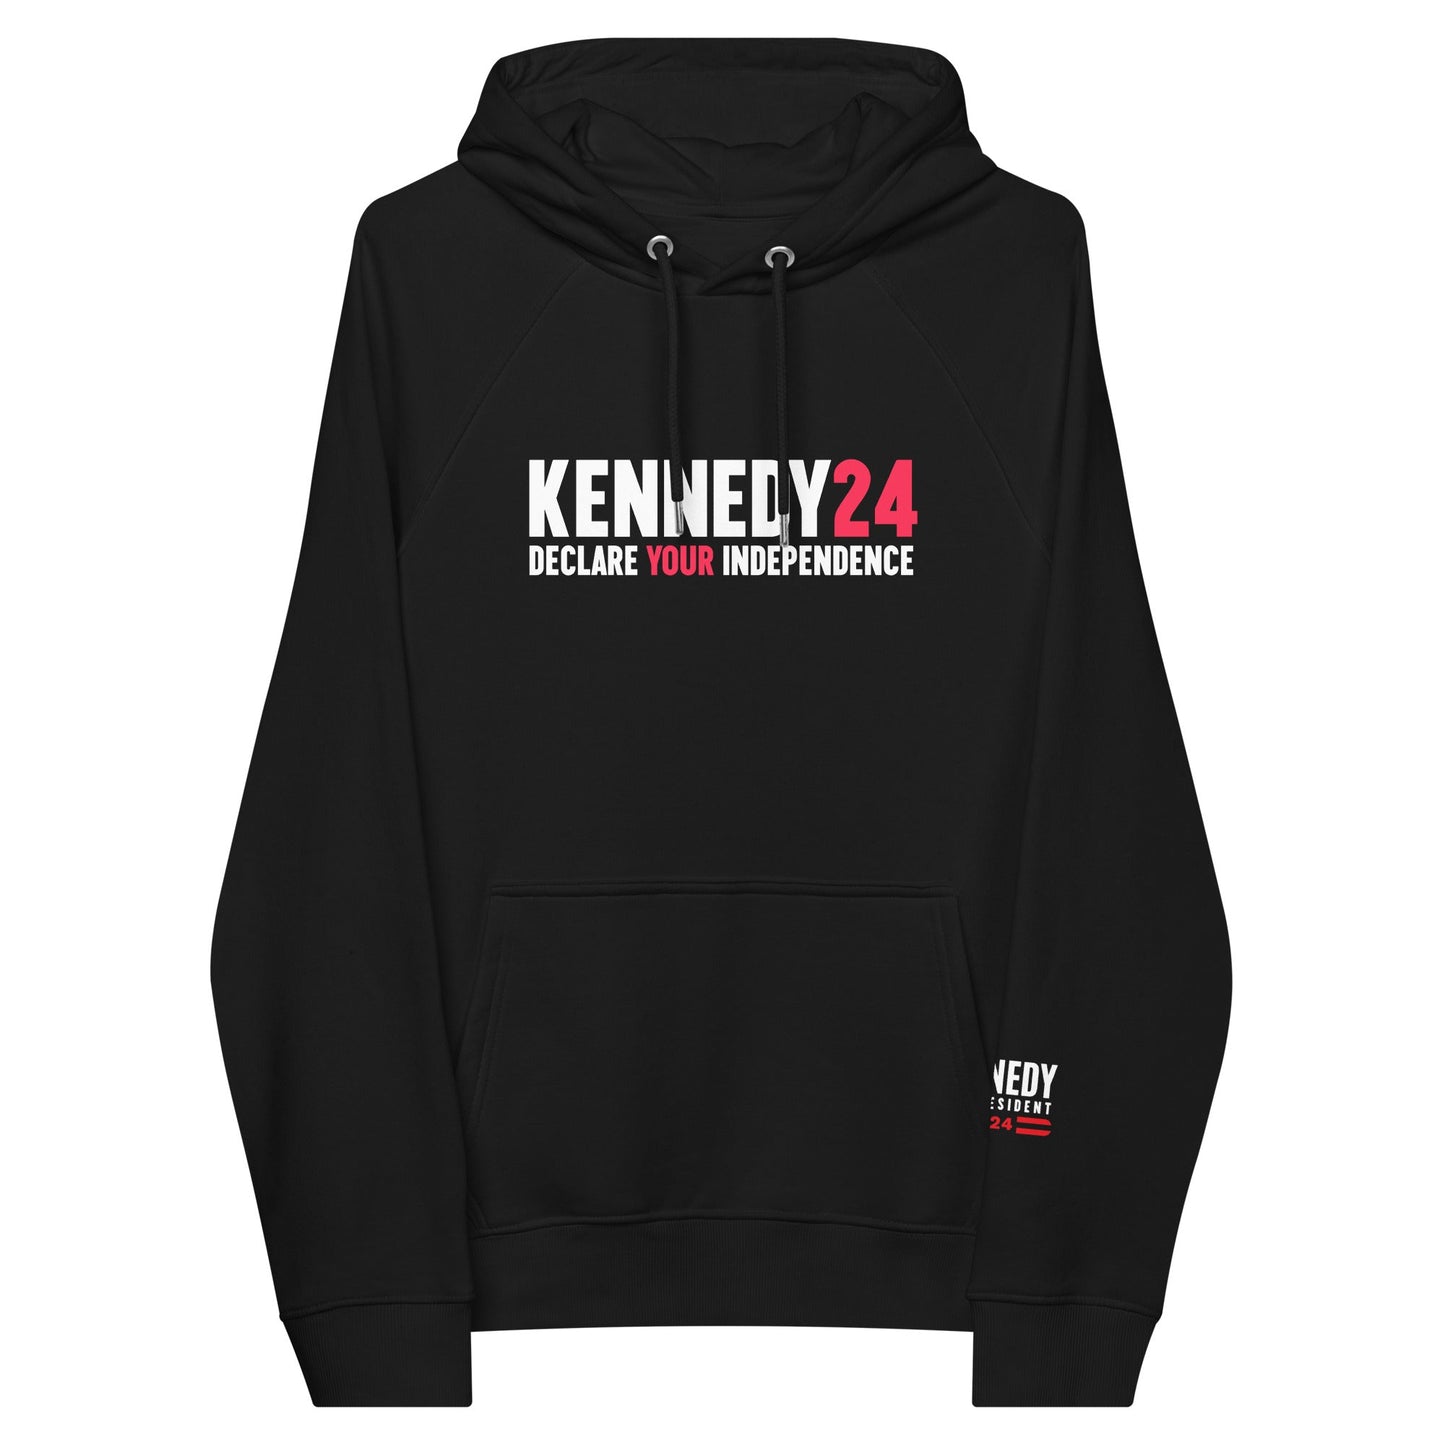 Declare Your Independence Unisex Organic Hoodie - TEAM KENNEDY. All rights reserved